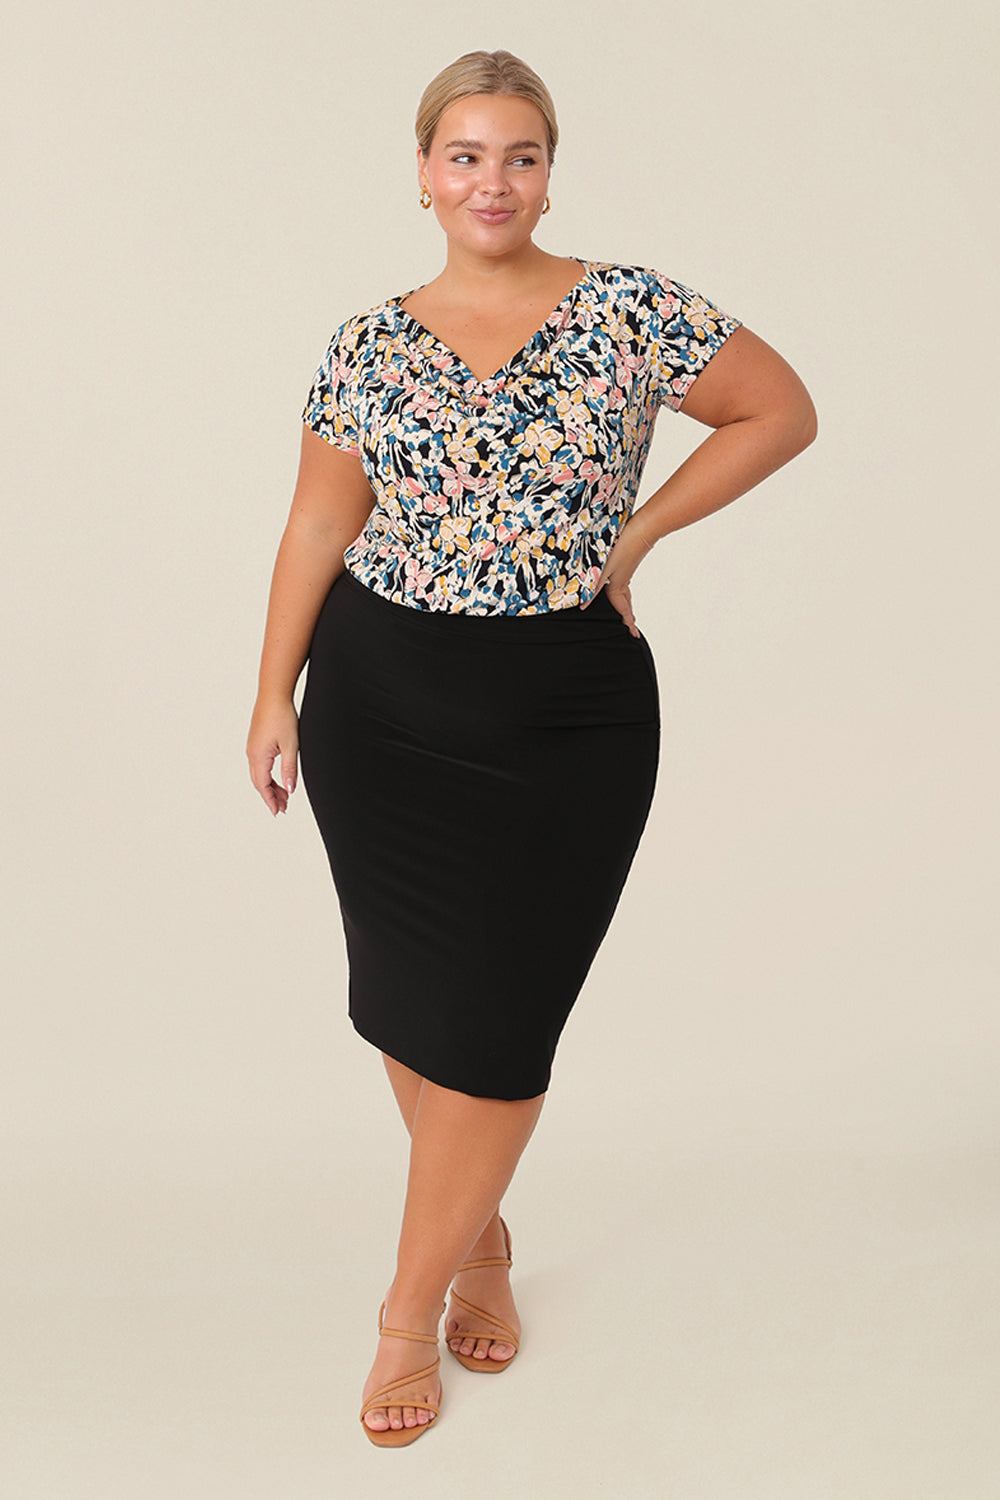 A petite height, size 14 woman wears a casual jersey top. The top has short raglan sleeves, a cowl neckline and is printed with a floral pattern paired with black tube skirt for a work wear look.